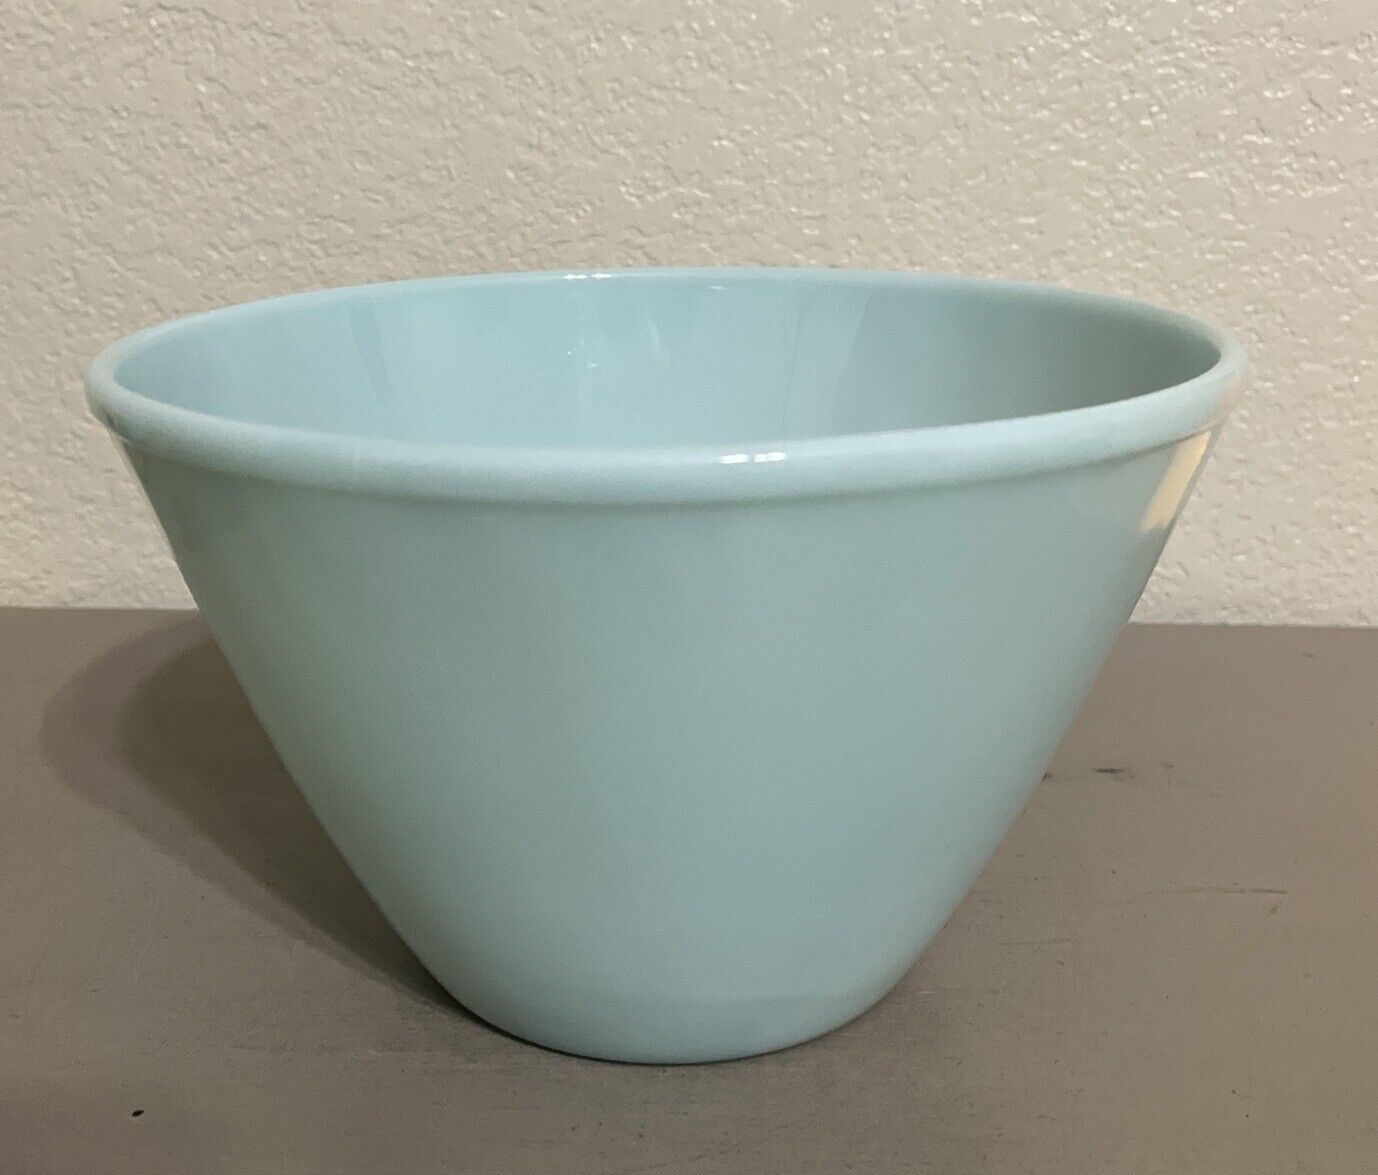 Vintage 1950s Fire King Azurite Blue Mixing Bowl by Anchor Hocking 1 1/2 Quart